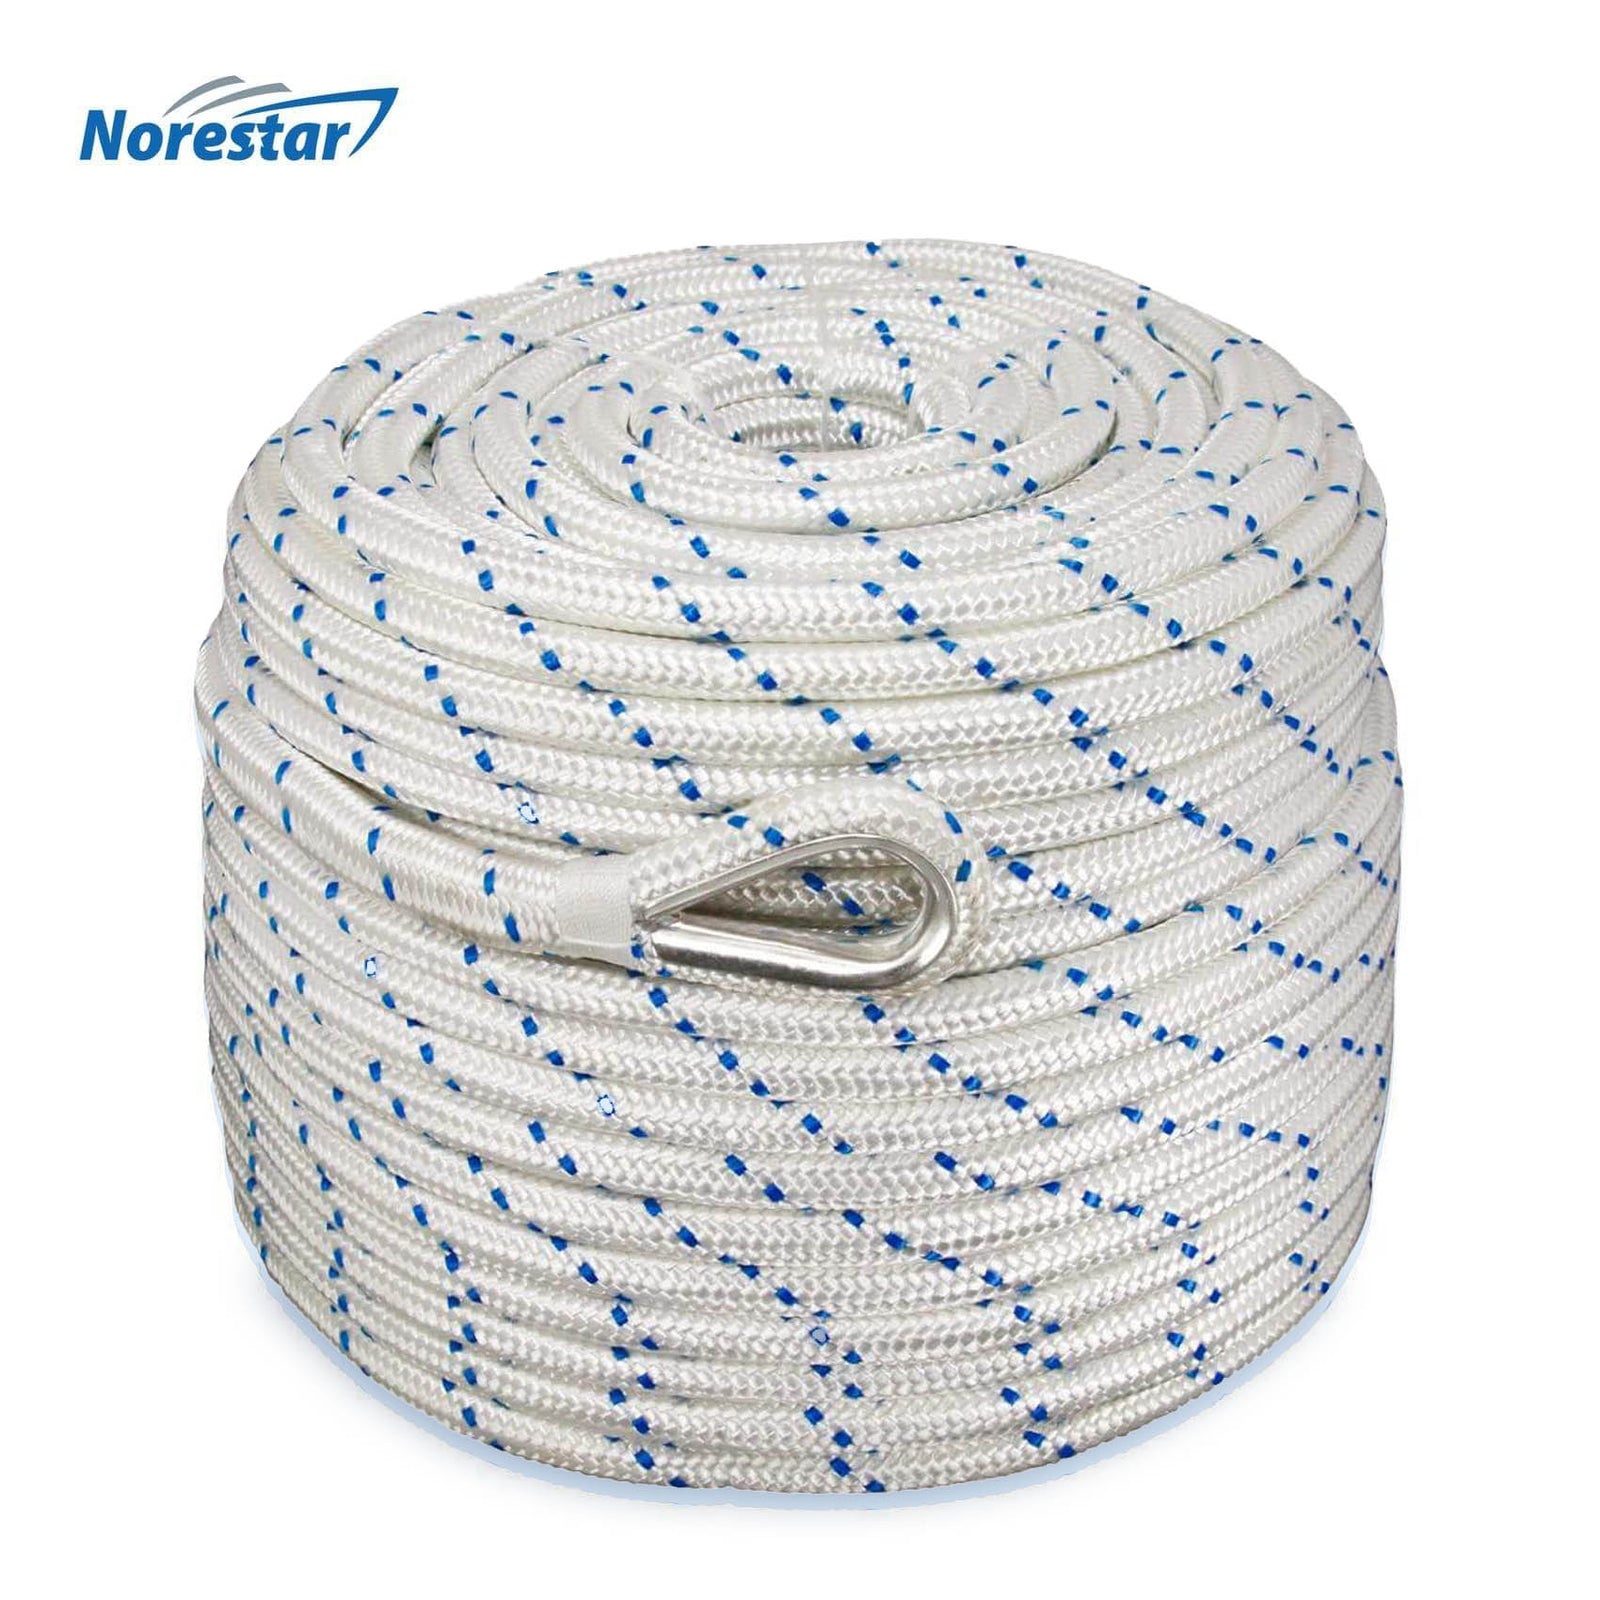 Norestar Double-Braided Nylon Anchor Rope with Stainless Steel Thimble